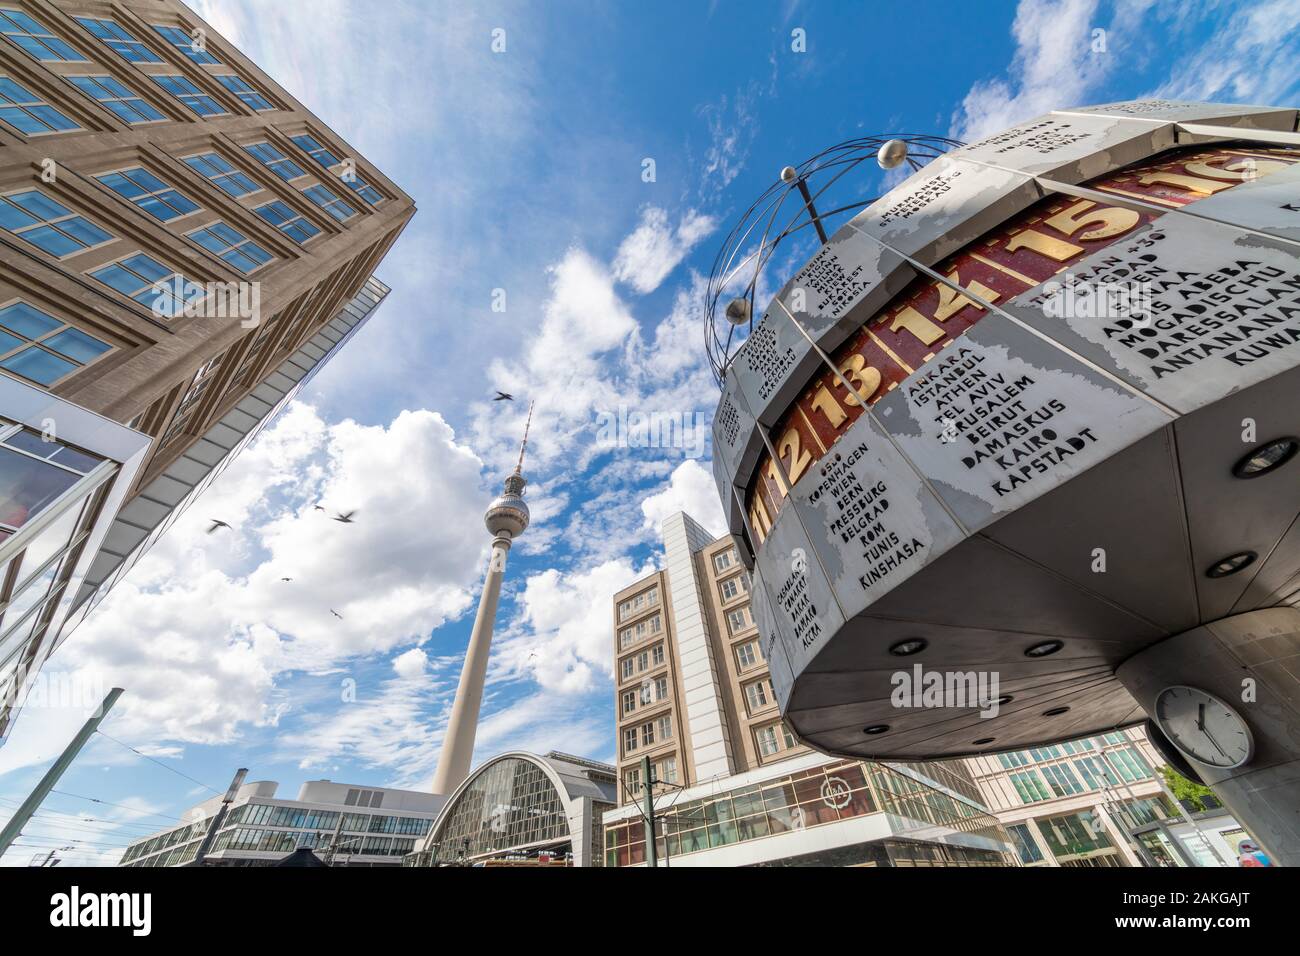 Wide angle view from below of Alexanderplatz and its attractions, with the World Clock in the foreground and the Fernsehturm in the background Stock Photo